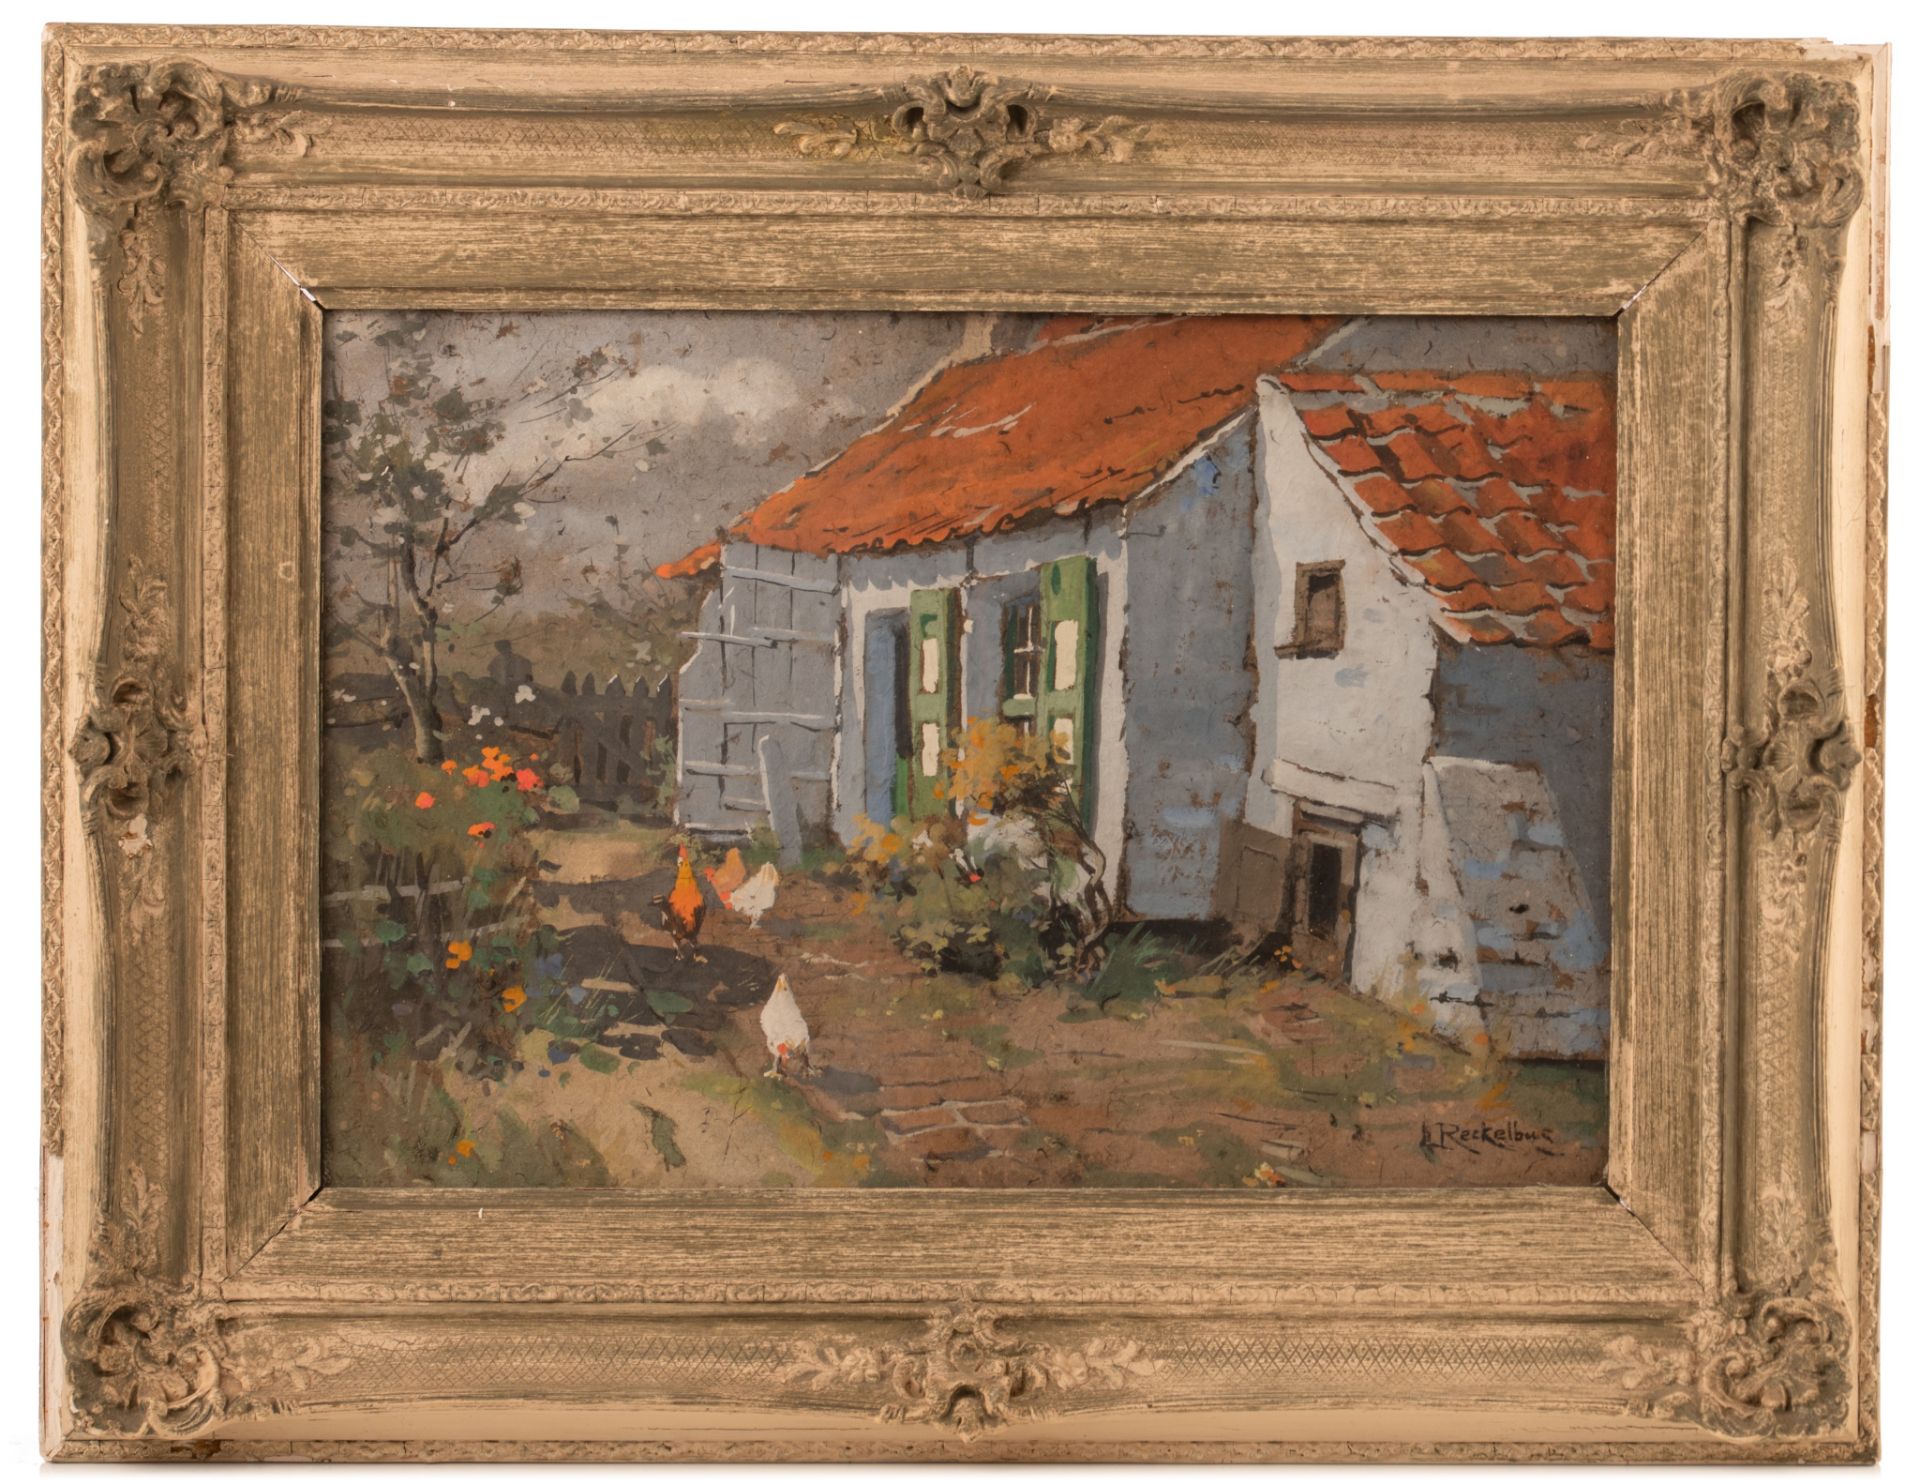 (BIDDING ONLY ON CARLOBONTE.BE) Louis Reckelbus (1864-1958), the henhouse, gouache on paper, 37 x 54 - Image 2 of 6